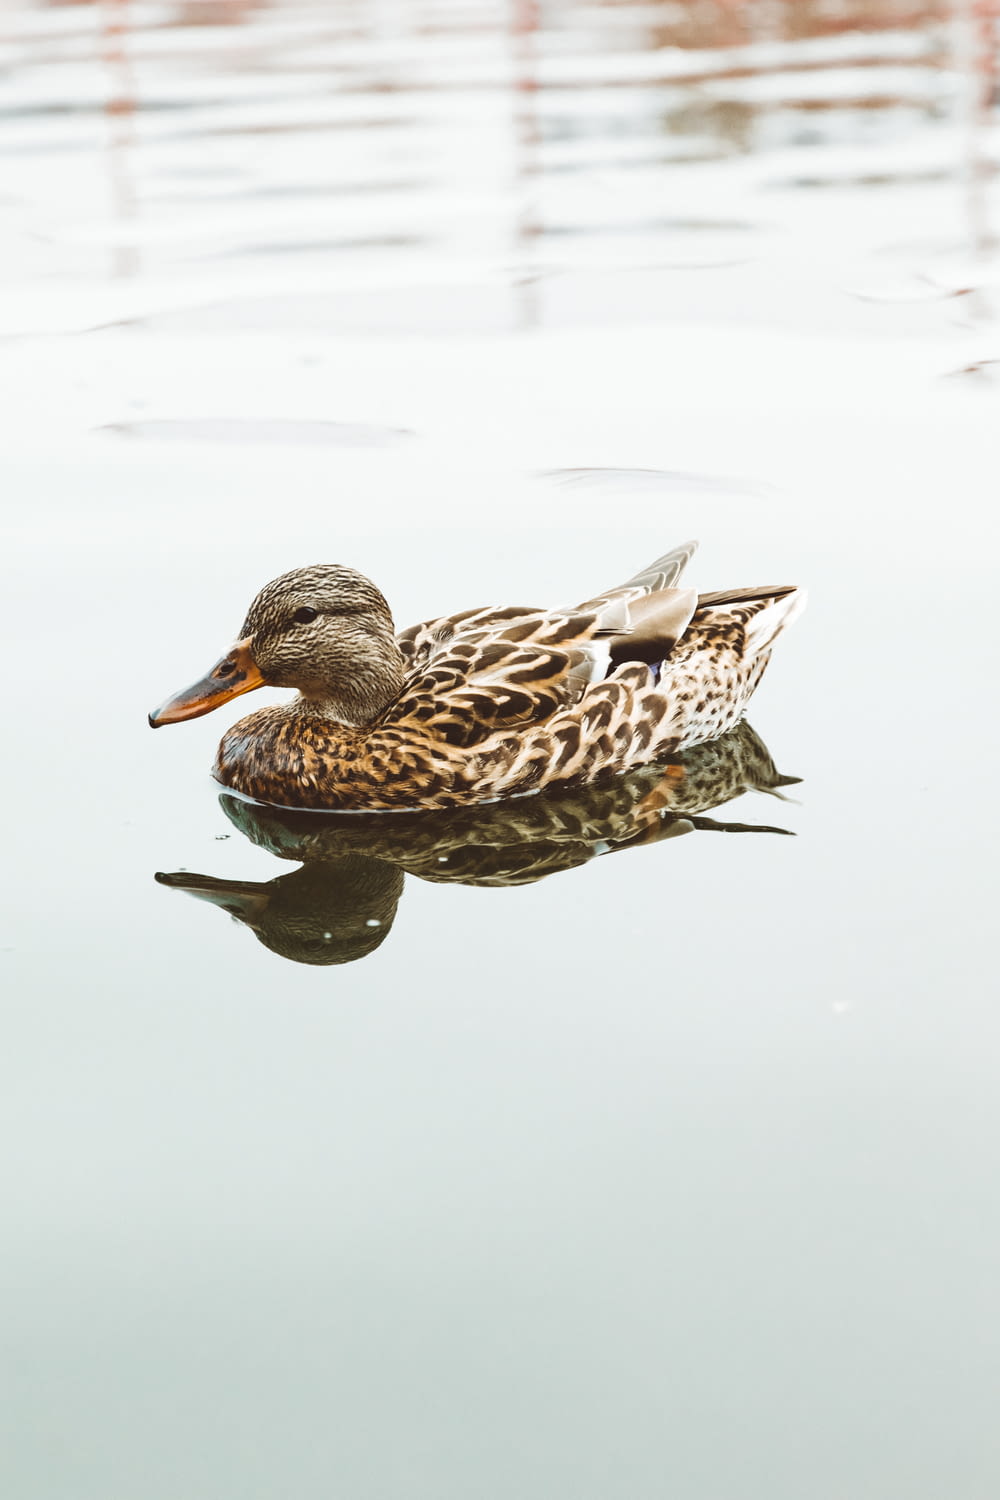 brown duck on body of water